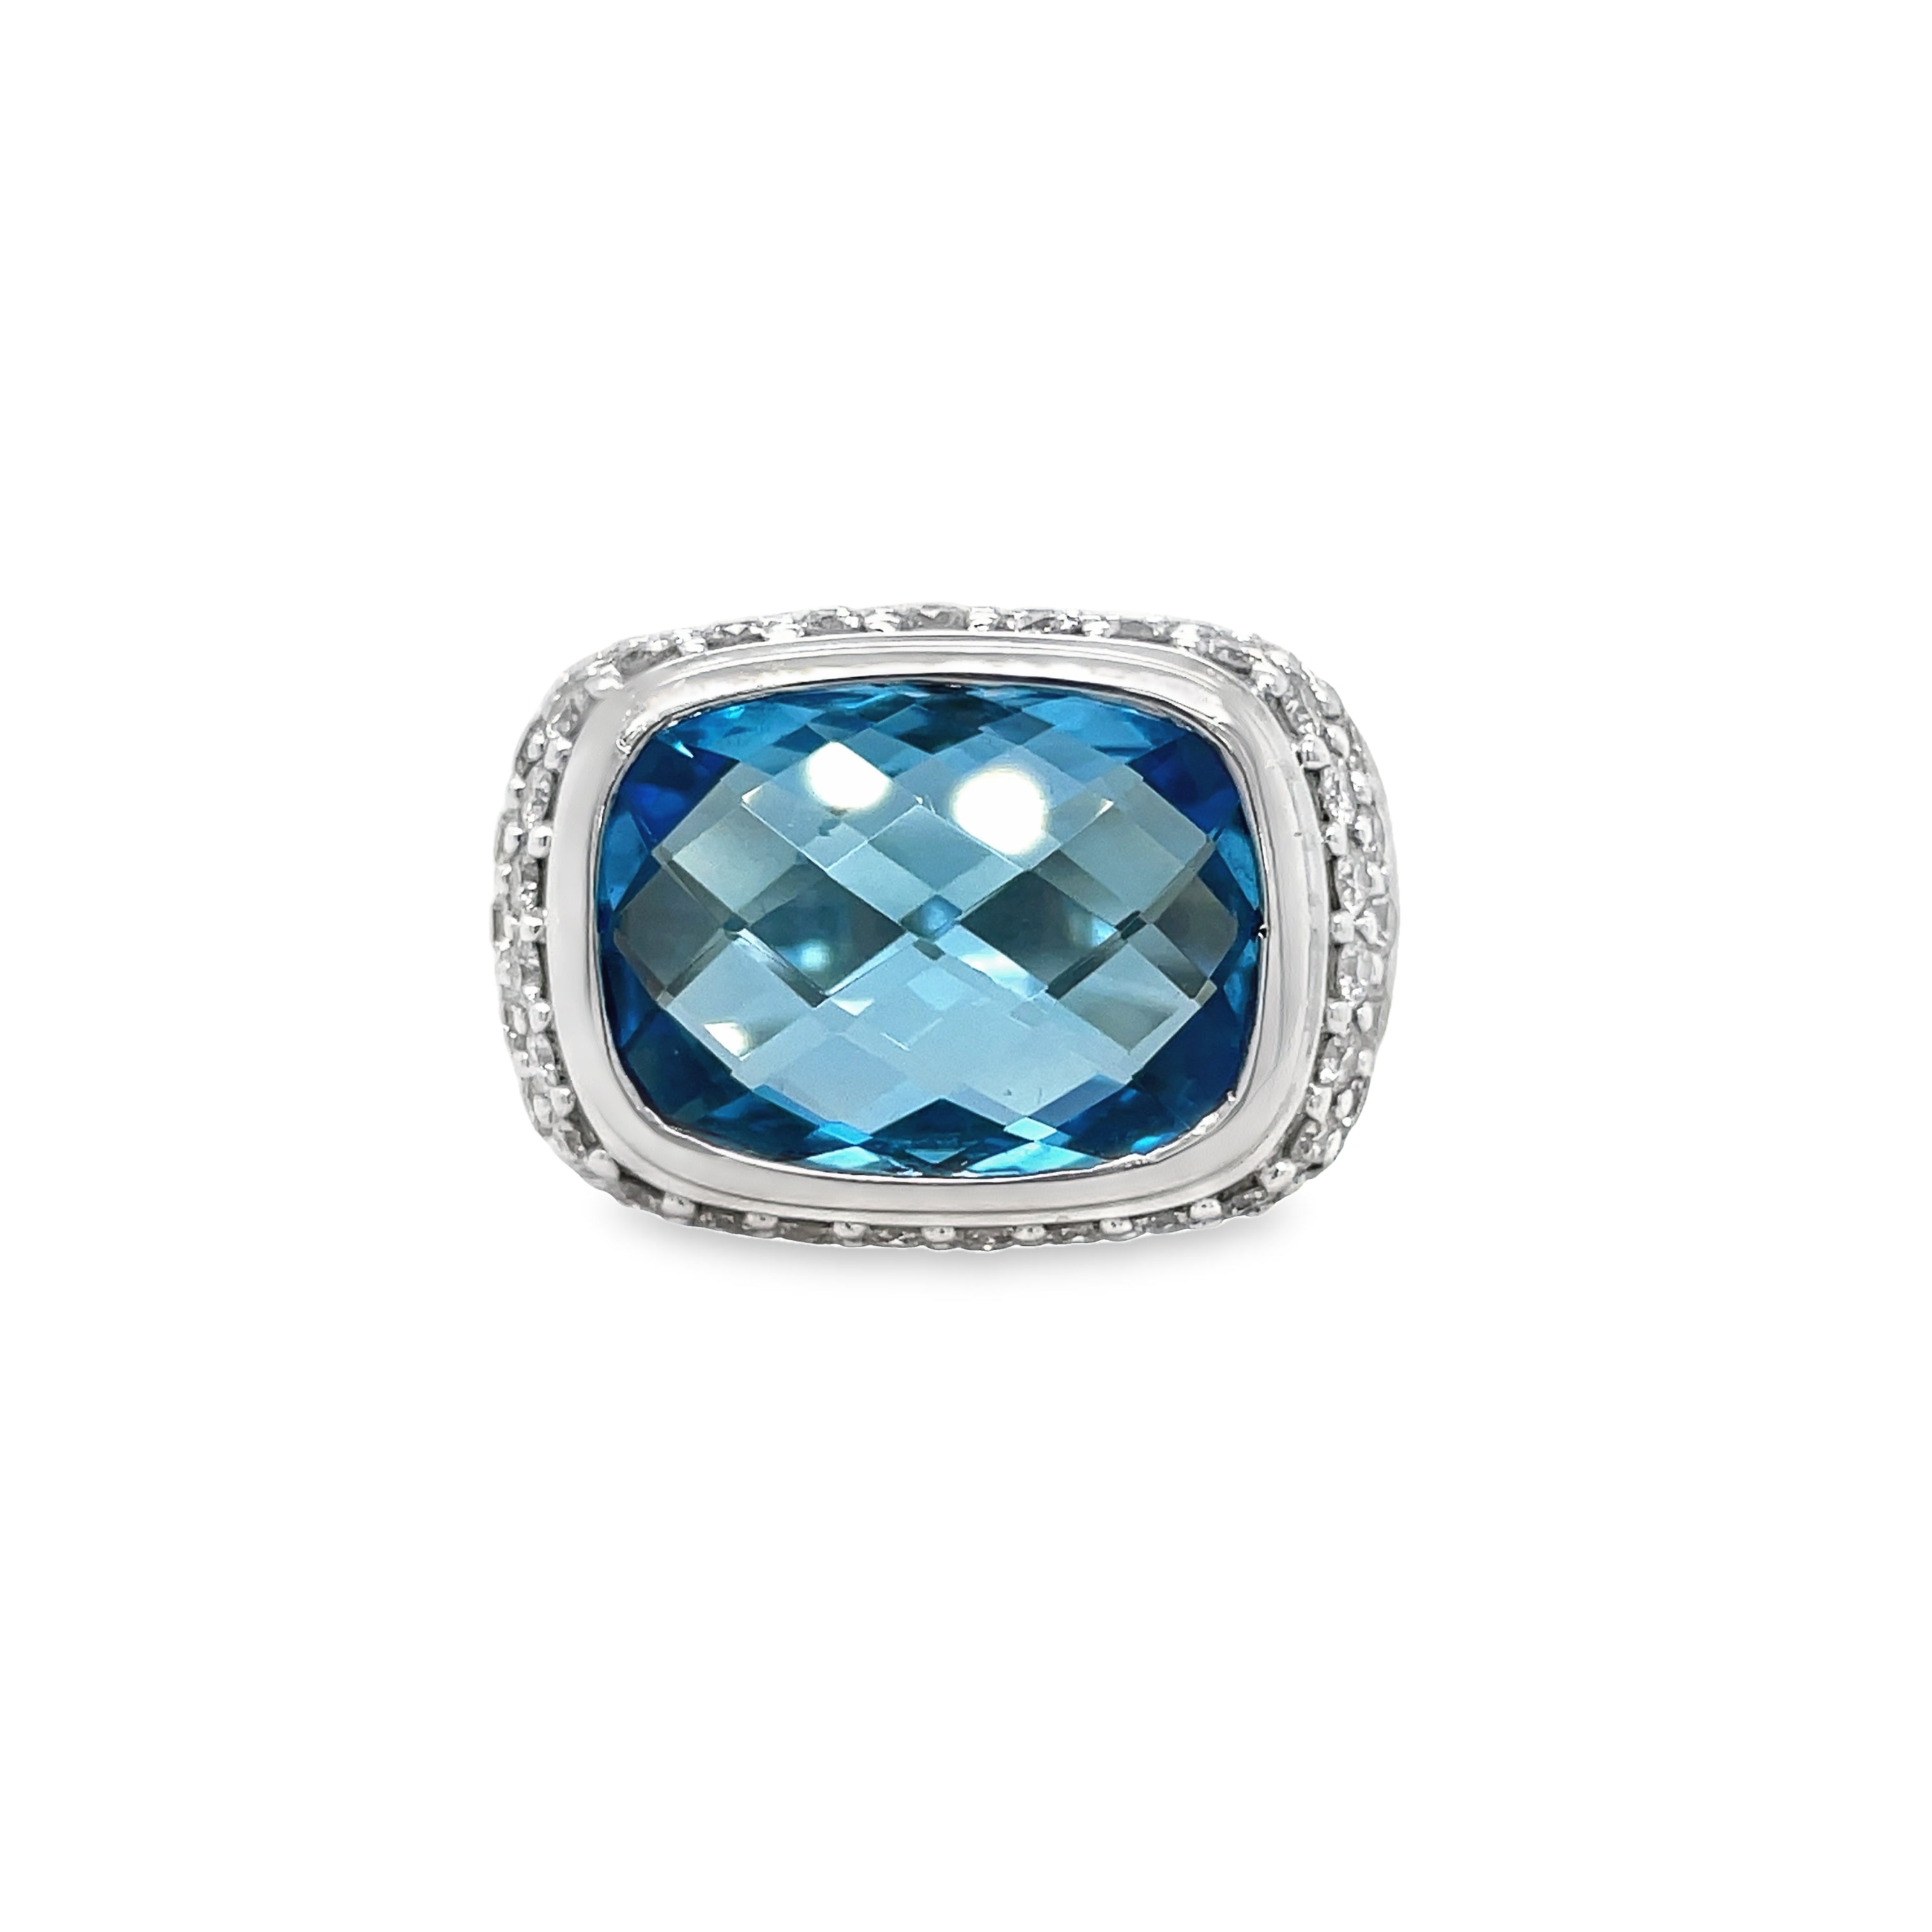 Elevate your style with our luxurious Sterling Silver Yurman Diamond Blue Topaz Chunky Ring. Made with genuine sterling silver and adorned with sparkling round diamonds and a stunning blue topaz gemstone, this chunky ring exudes elegance and sophistication. Perfect for any occasion, it's sure to make a statement and turn heads wherever you go.